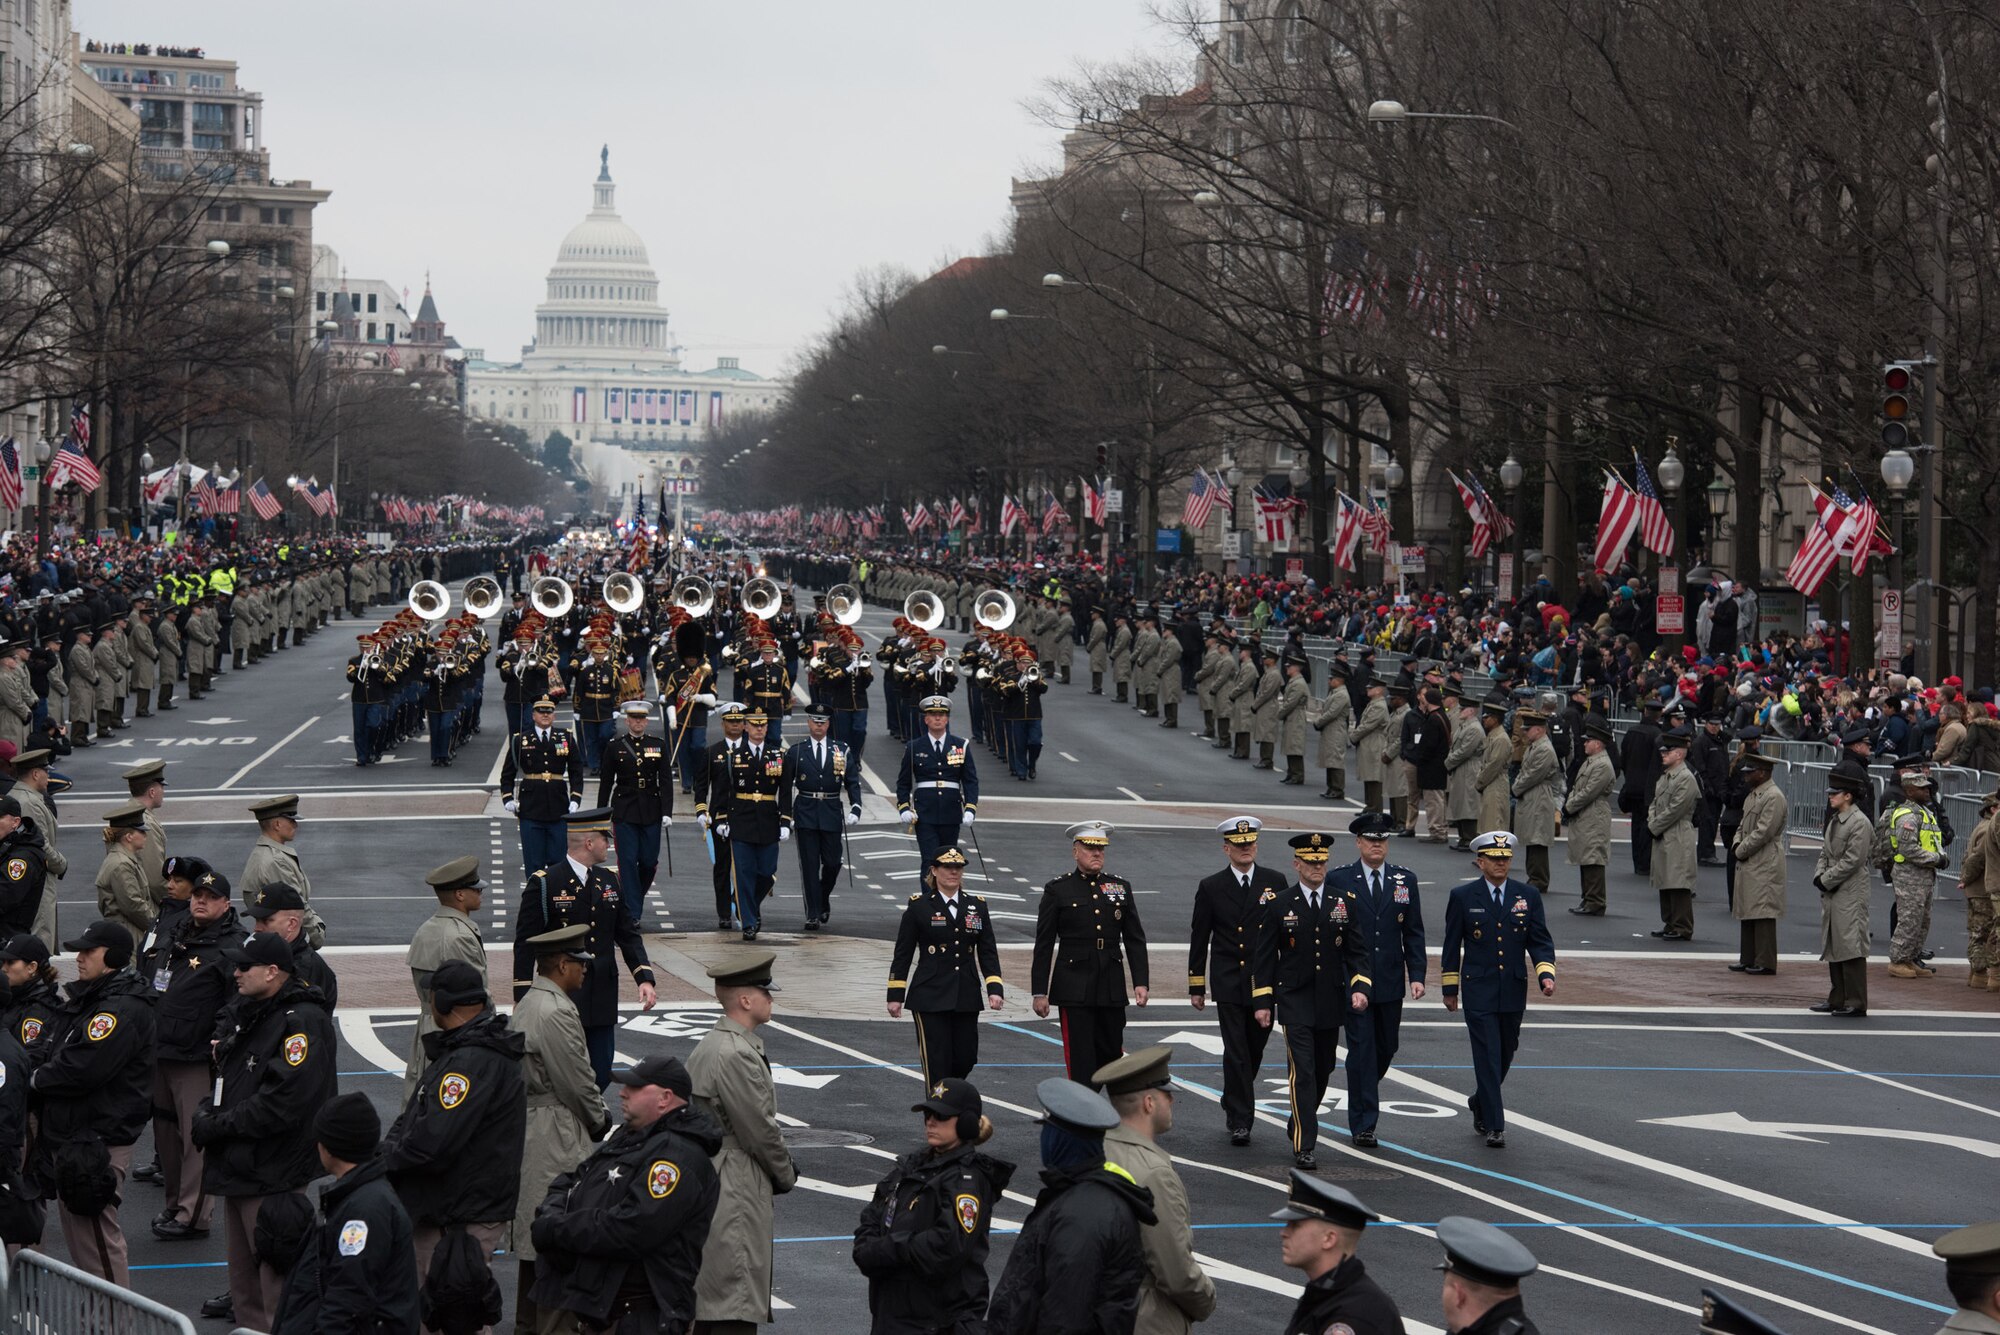 U.S. Servicemembers march down Pennsylvania Avenue during the Presidential Inaugural Parade in Washington D.C., January 20, 2017. The Parade was held to celebrate the inauguration of President Donald Trump and featured eight members from the Band of the Golden West from Travis Air Force Base, Calif. (U.S. Army photo by Sgt. George Huley)